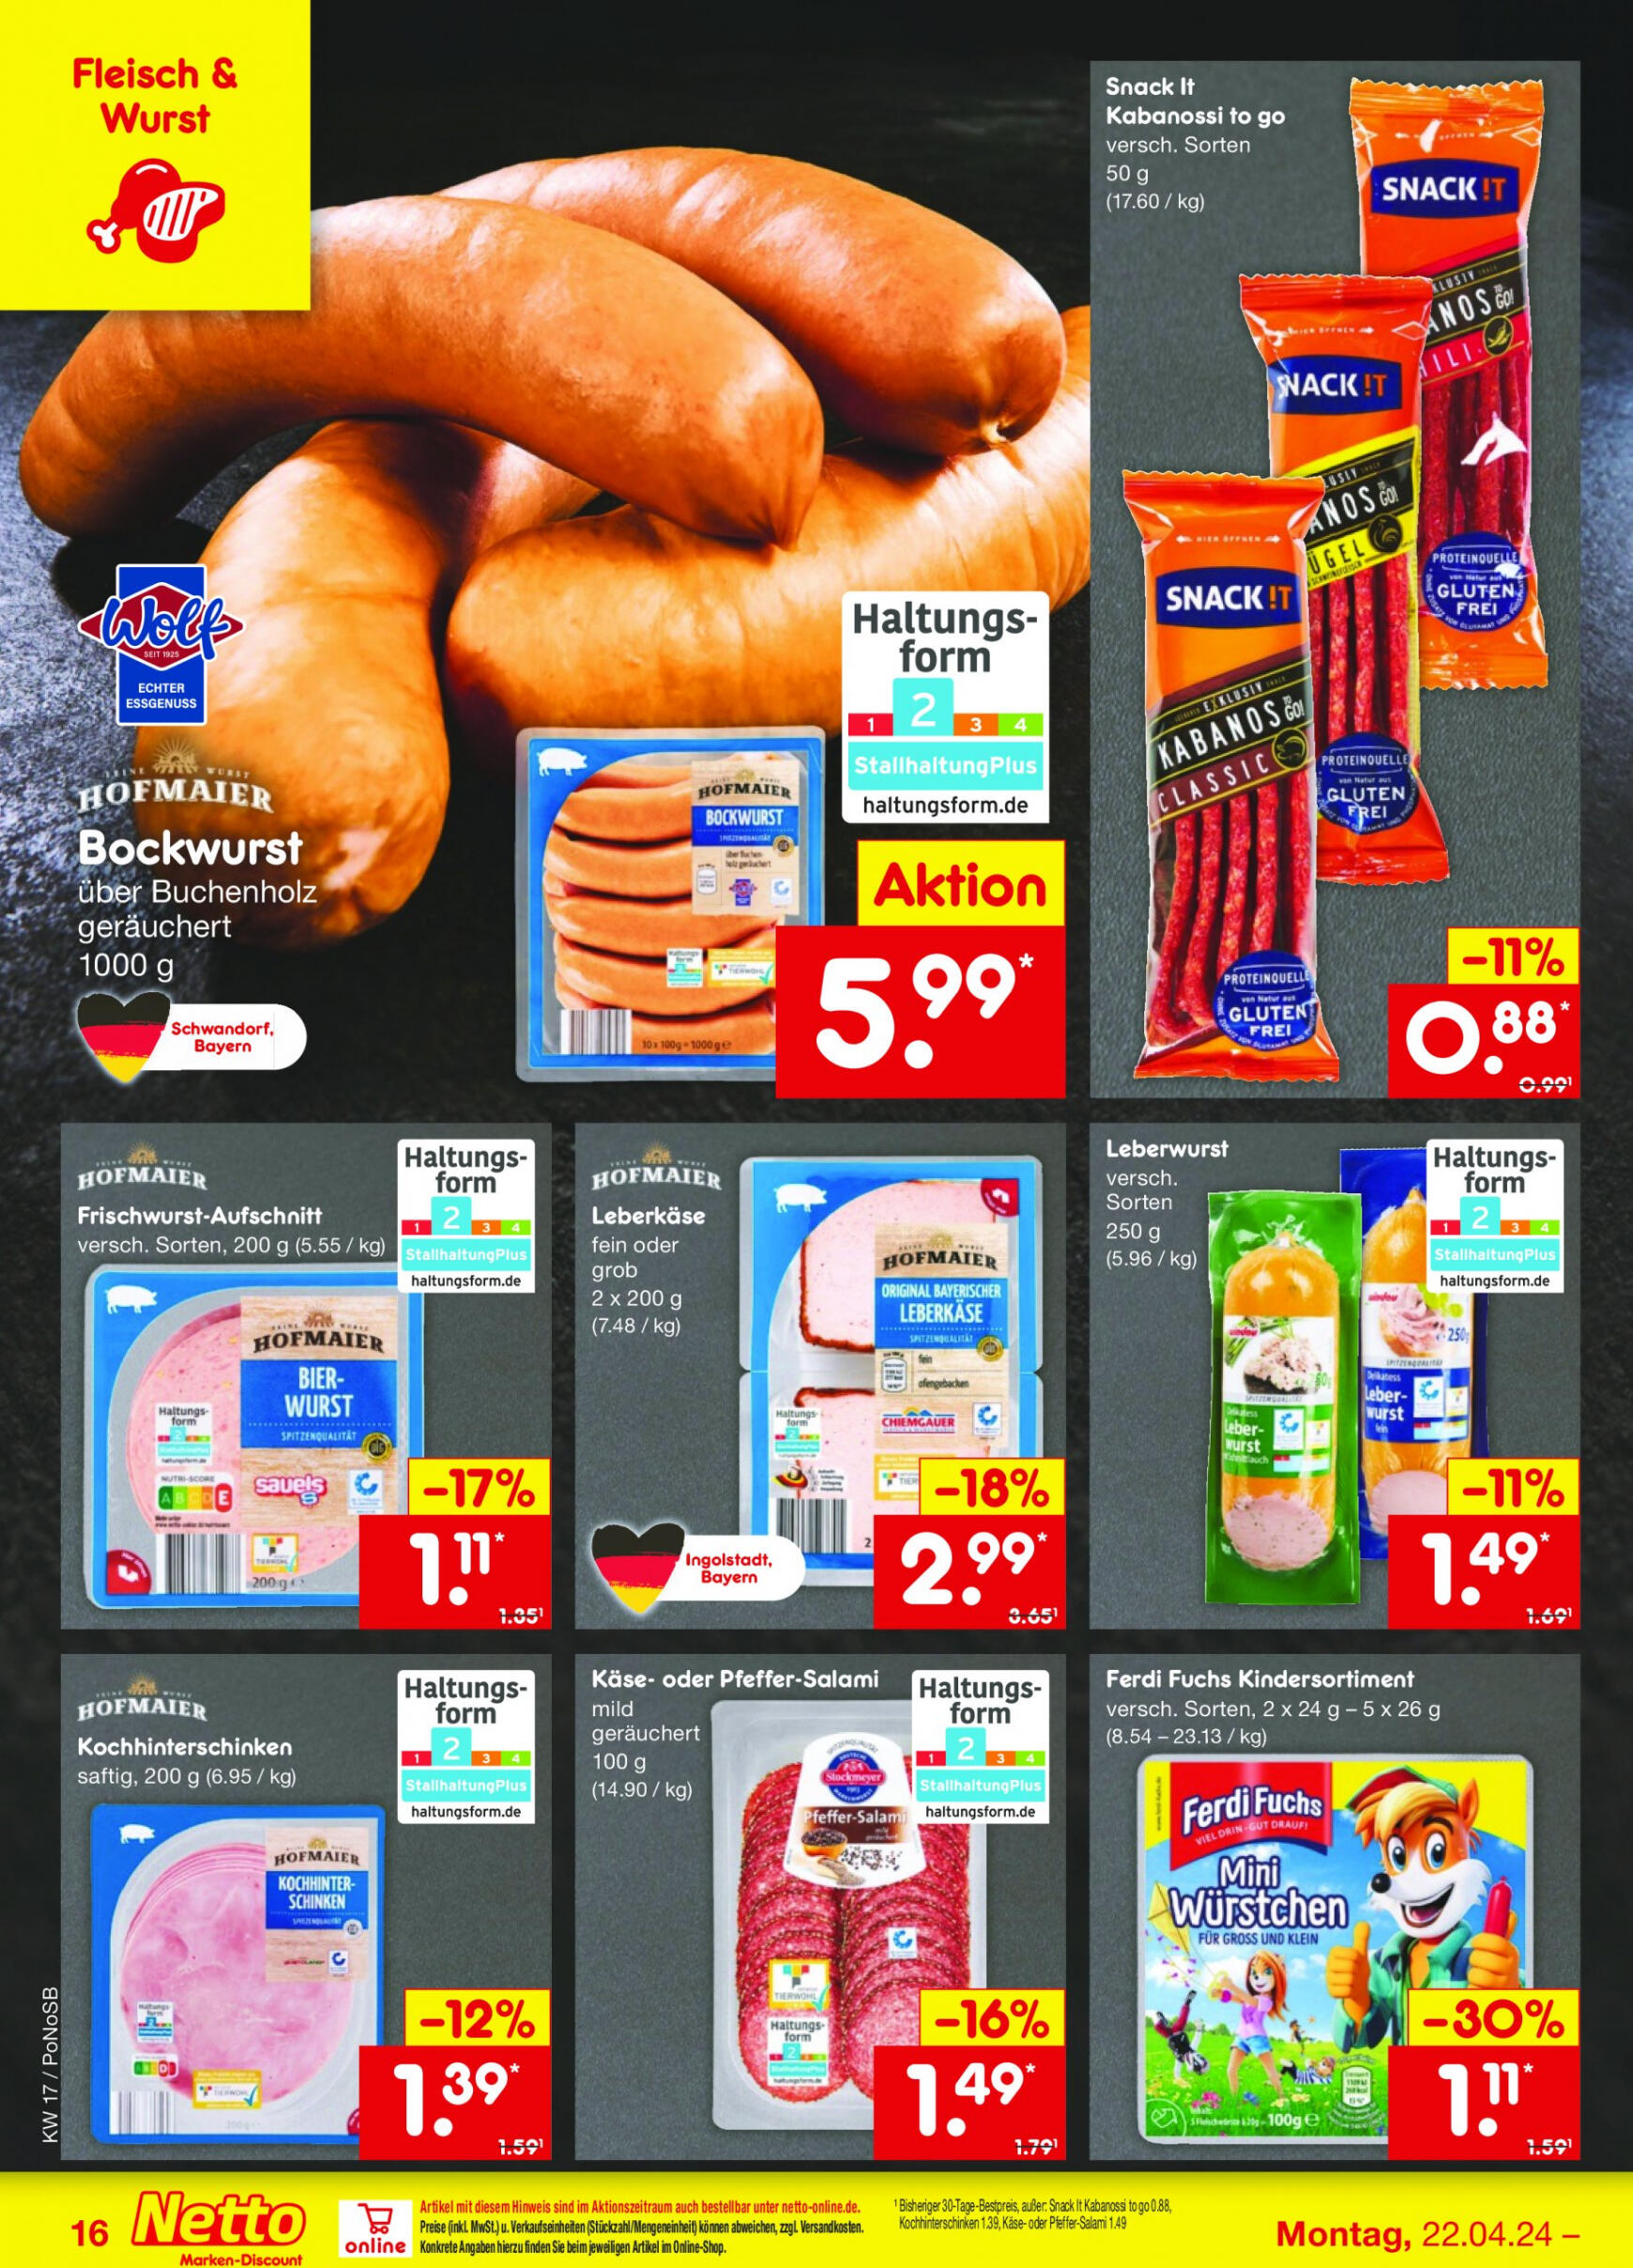 netto - Flyer Netto aktuell 22.04. - 27.04. - page: 18